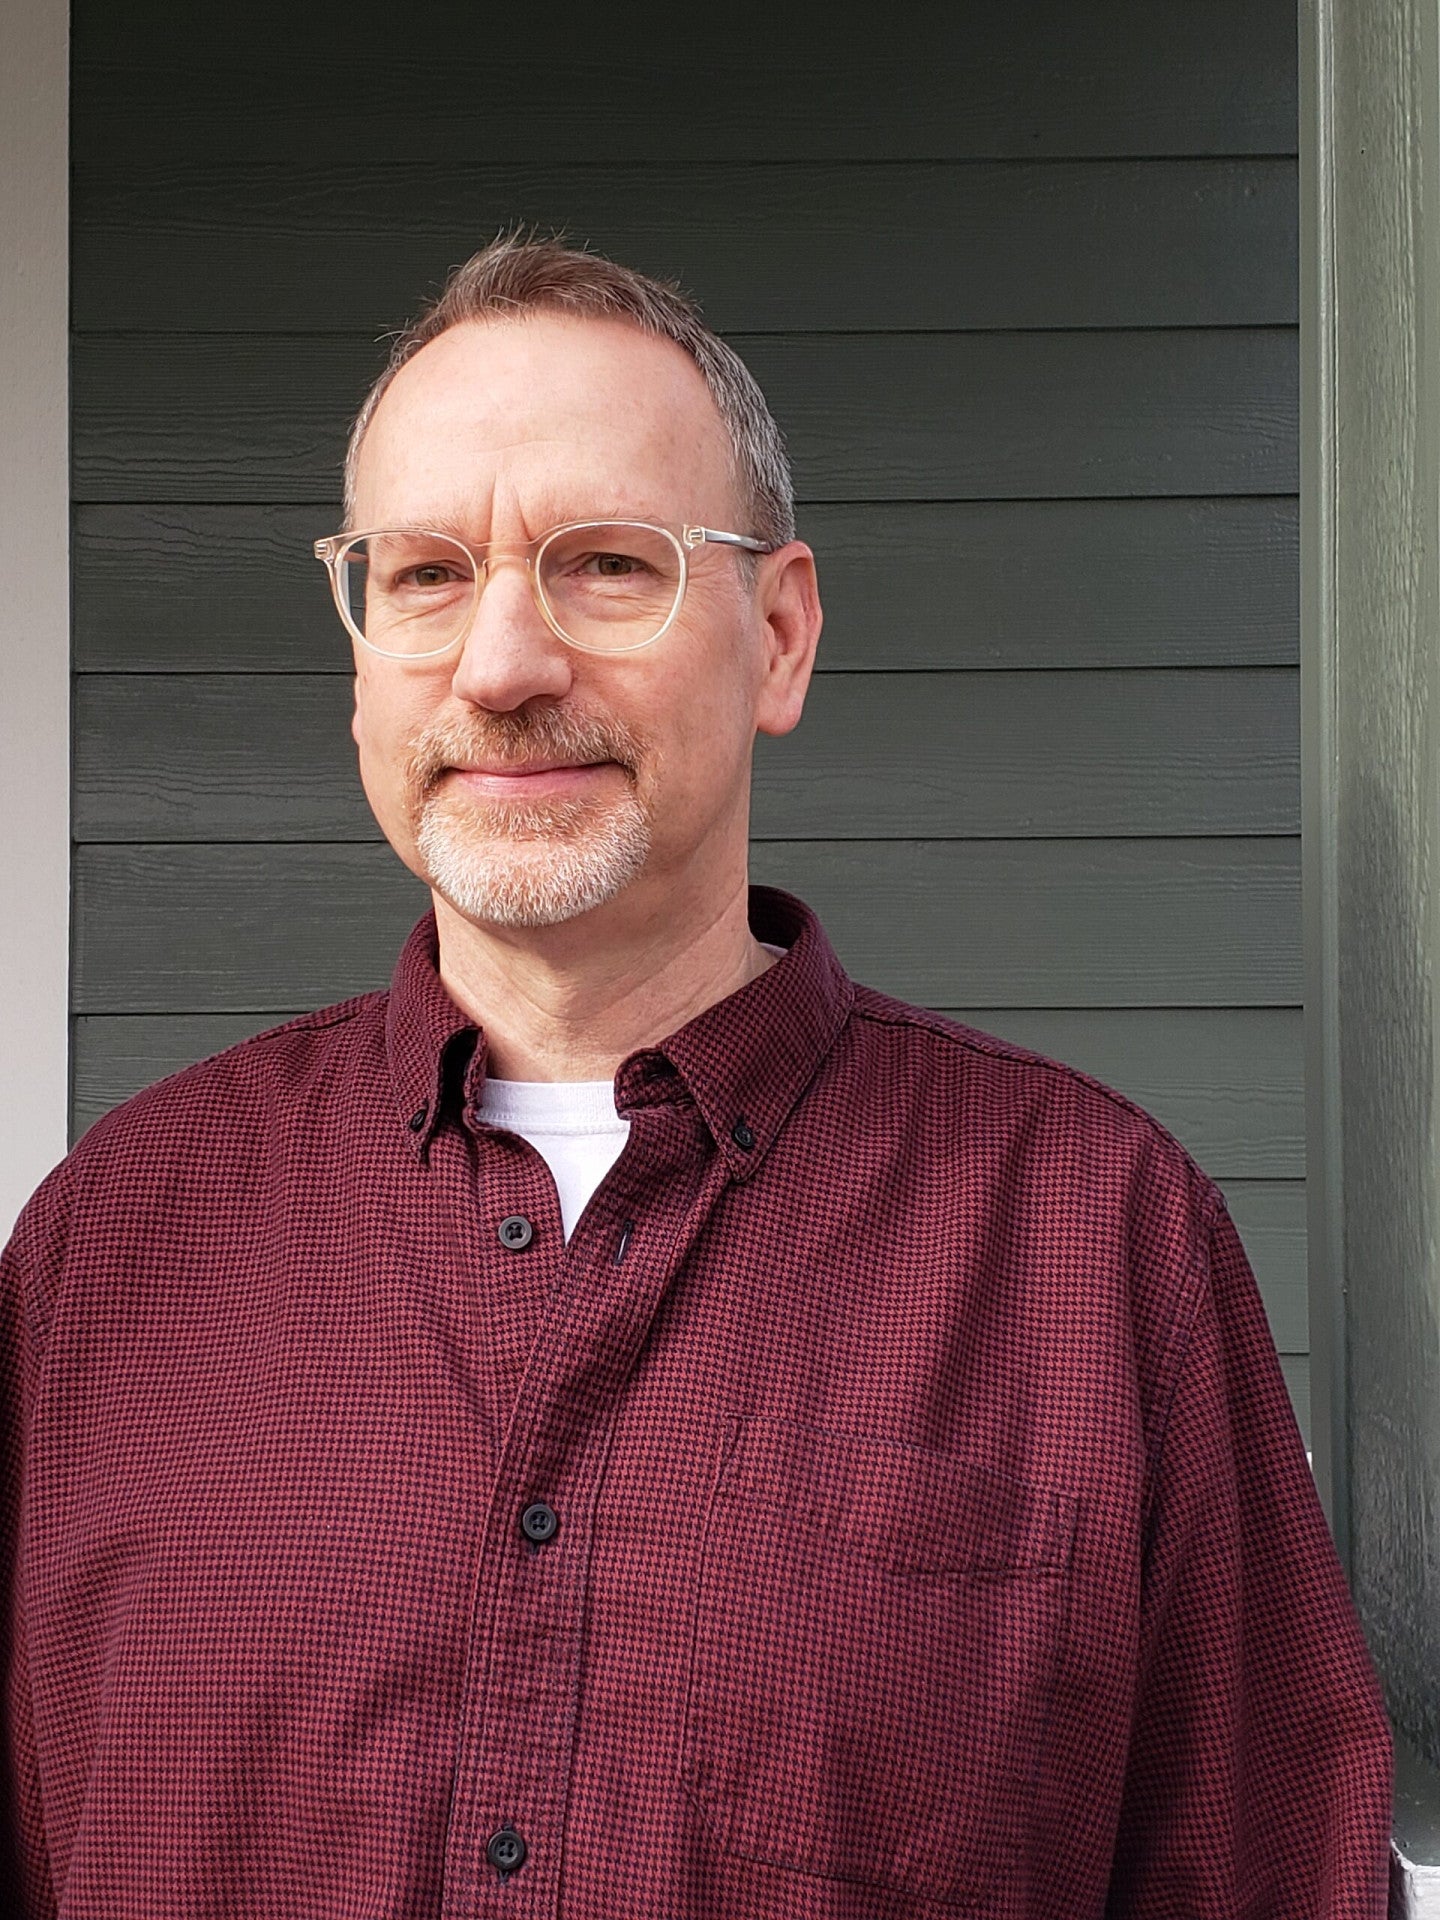 Image of man with glasses and a red button down shirt